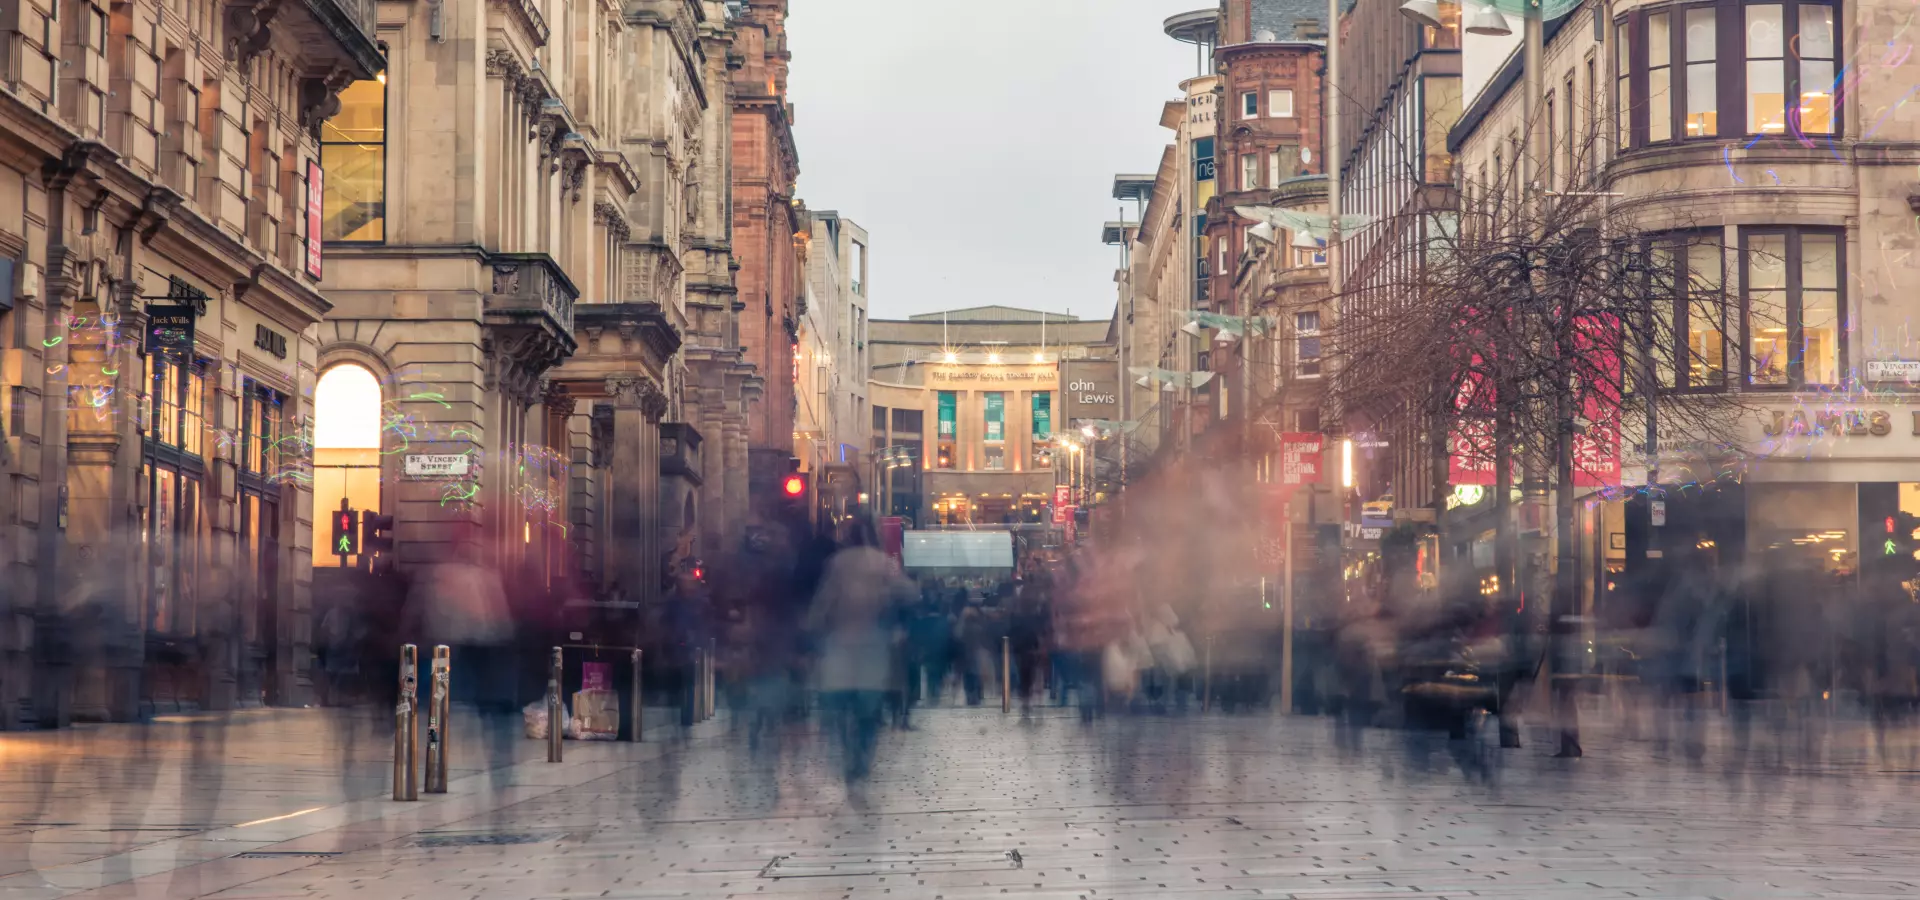 Street in Glasgow city centre with people walking.